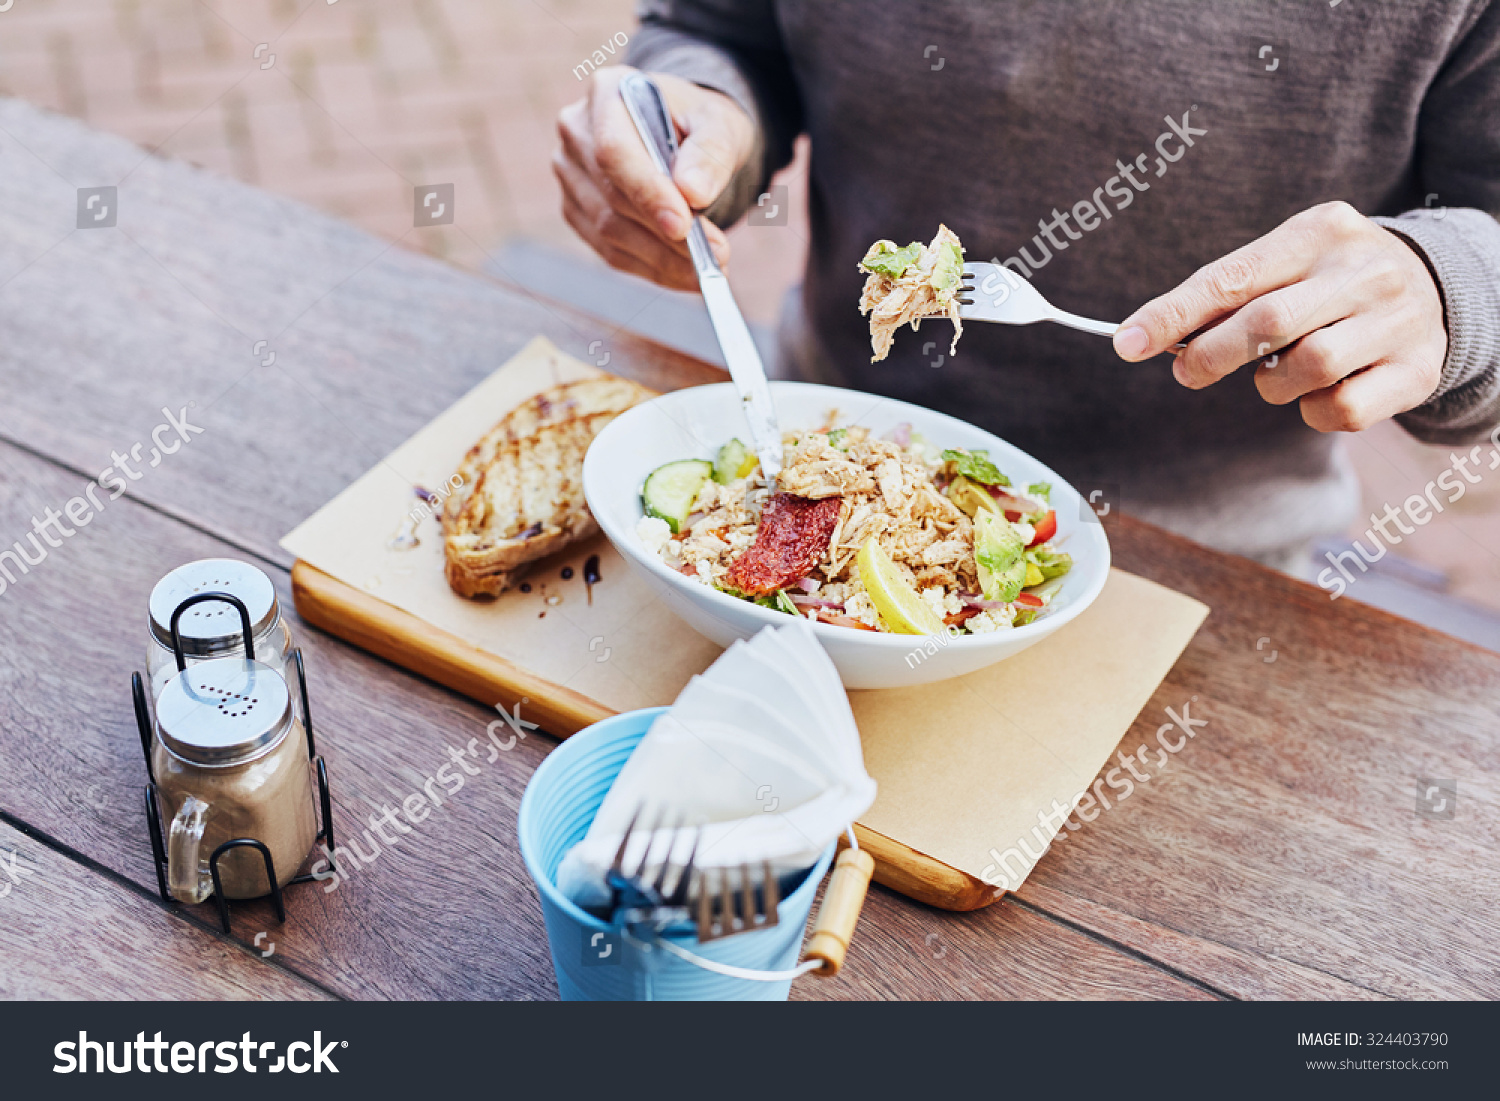 Cropped image of a man on his lunch break eating a fresh and healthy salad with chicken, avocado, sundried tomatoes and fresh sliced baguette on the side while sitting at a wooden table #324403790